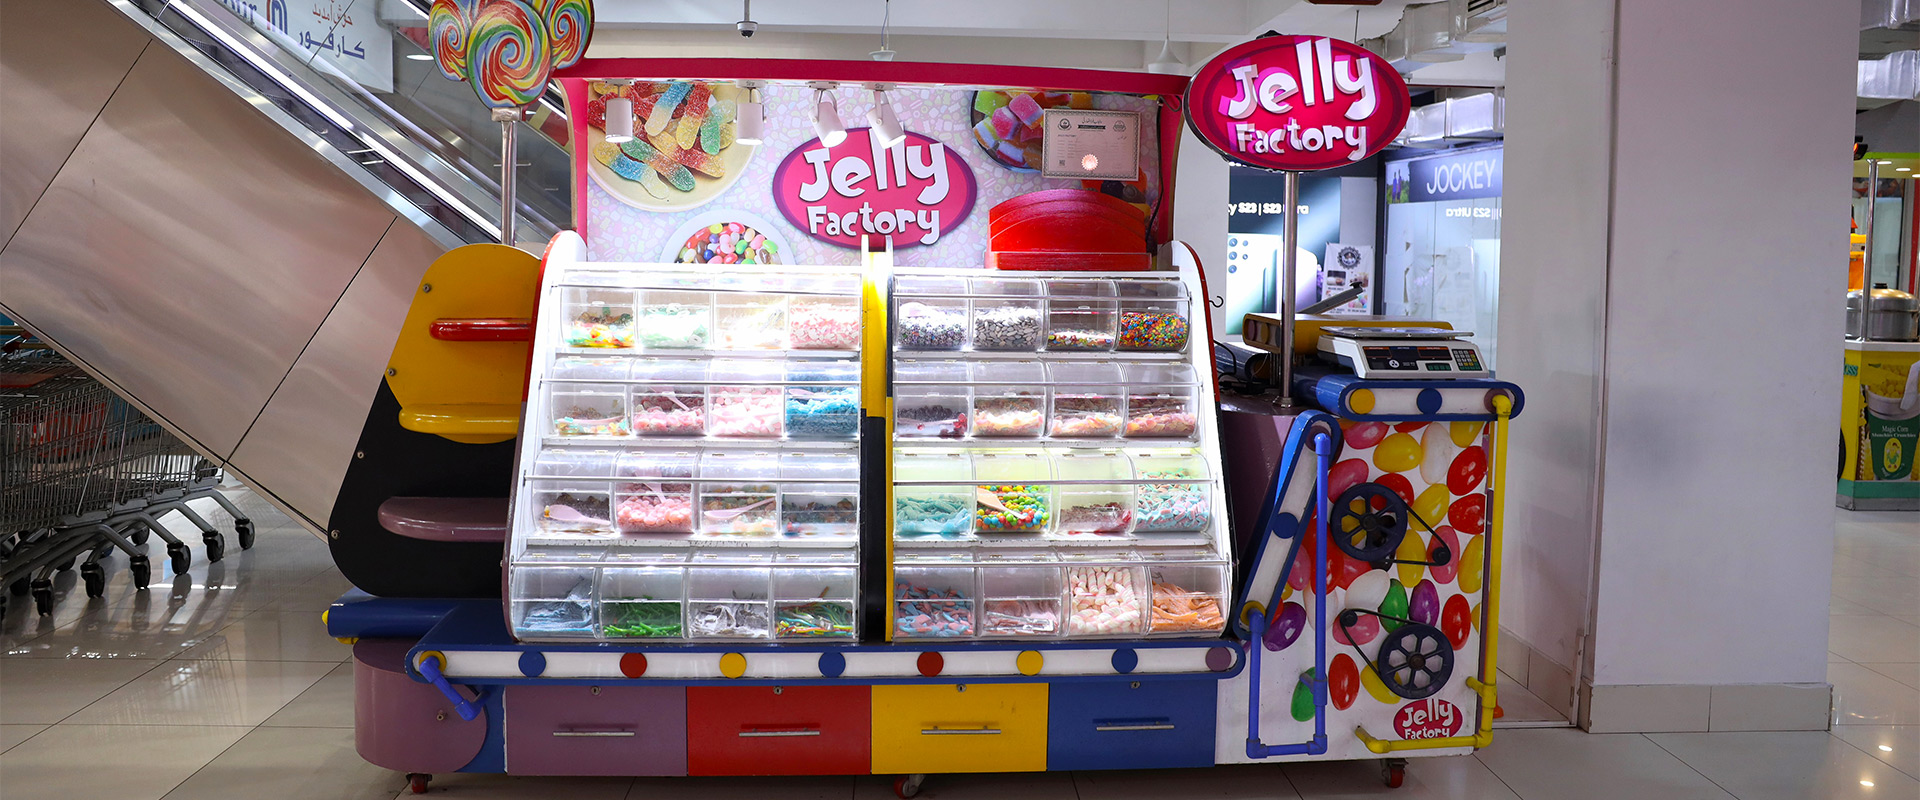 jelly-factory-2